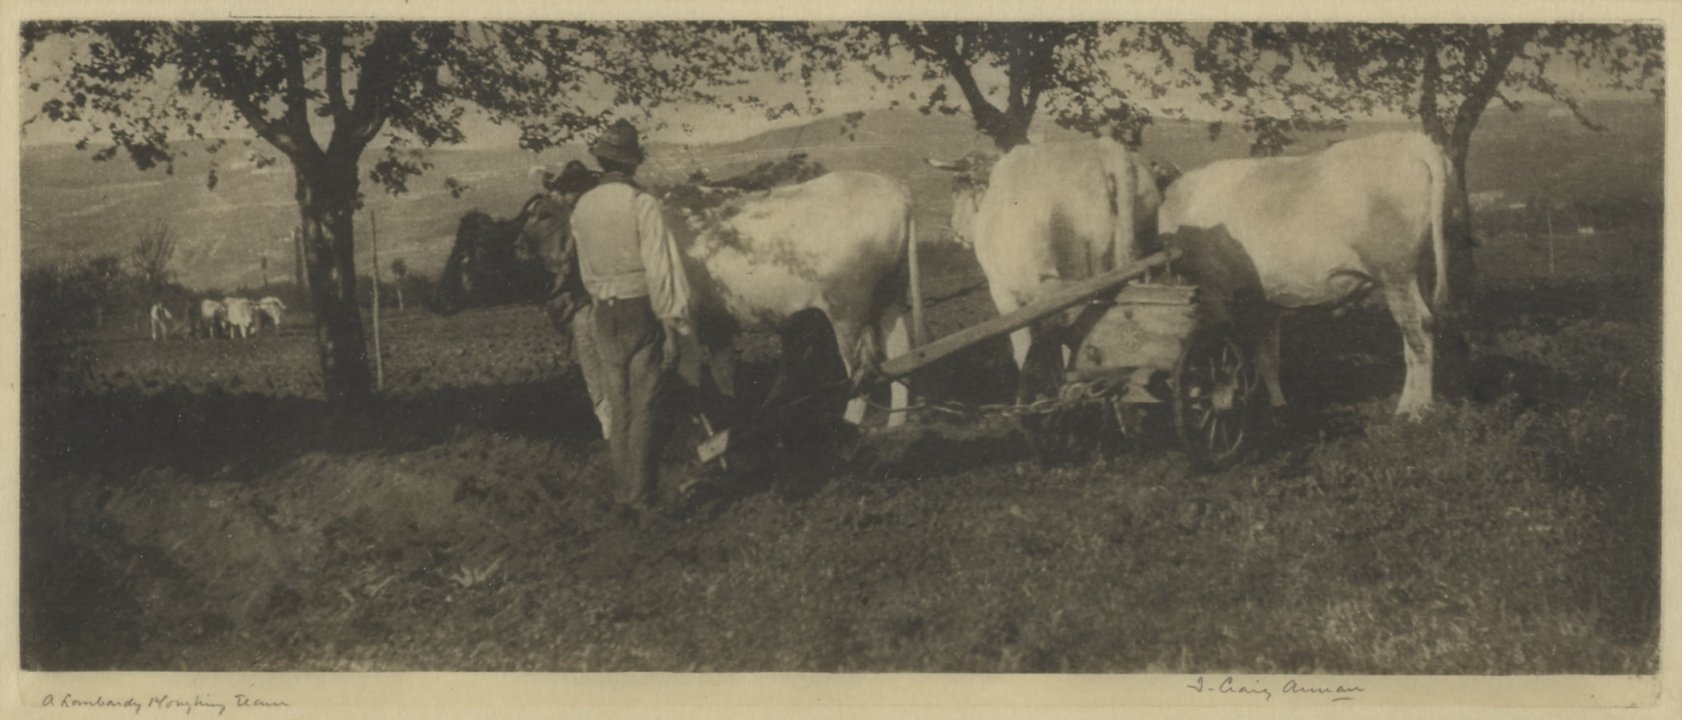 Lombardy Ploughing Team